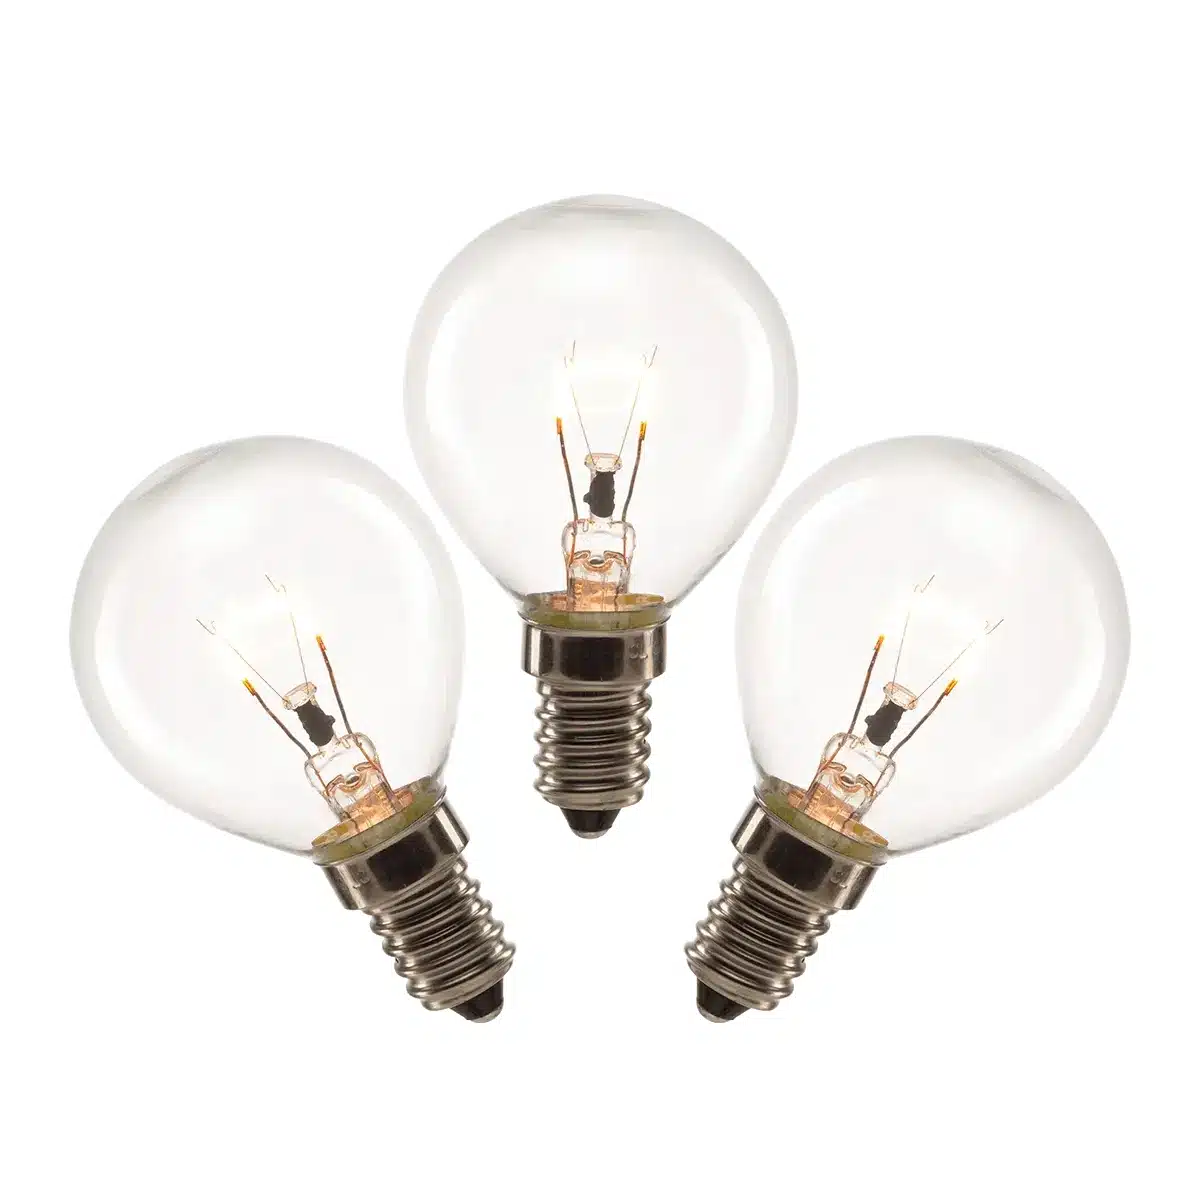 Where to Get Replacement Scentsy Light Bulbs